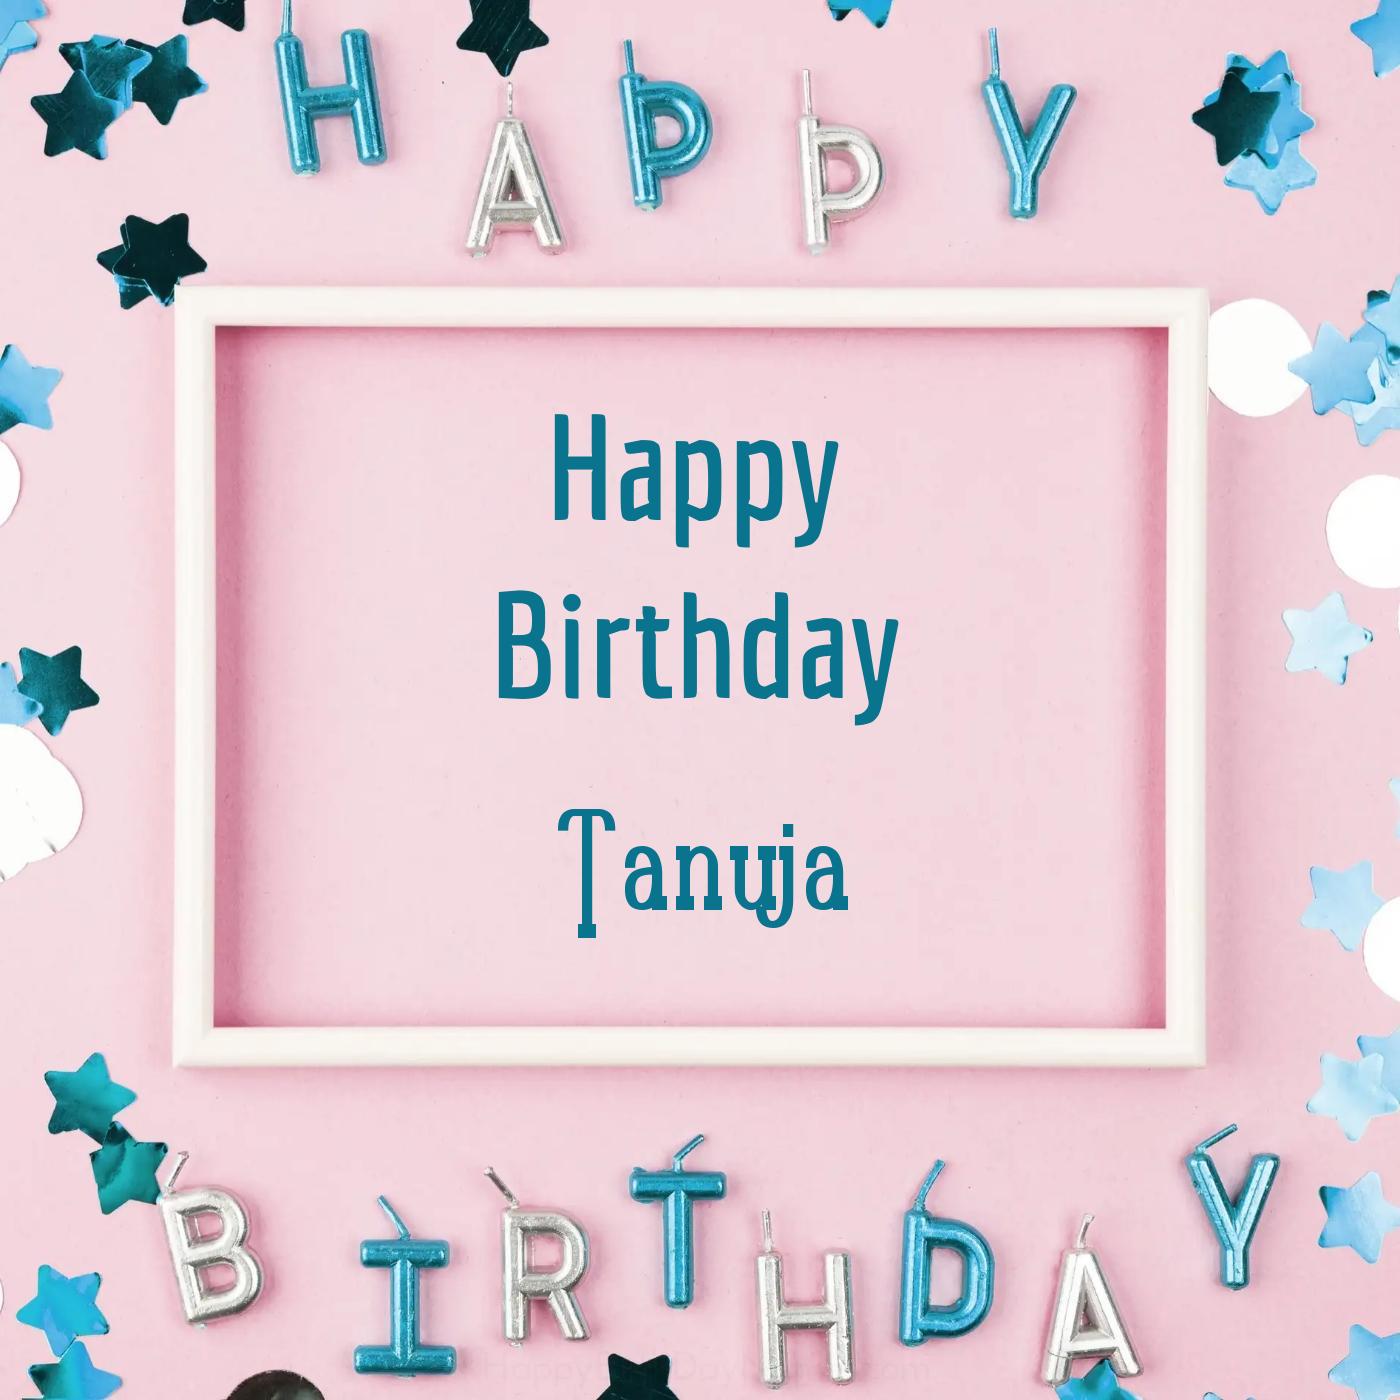 Happy Birthday Tanuja Pink Frame Card